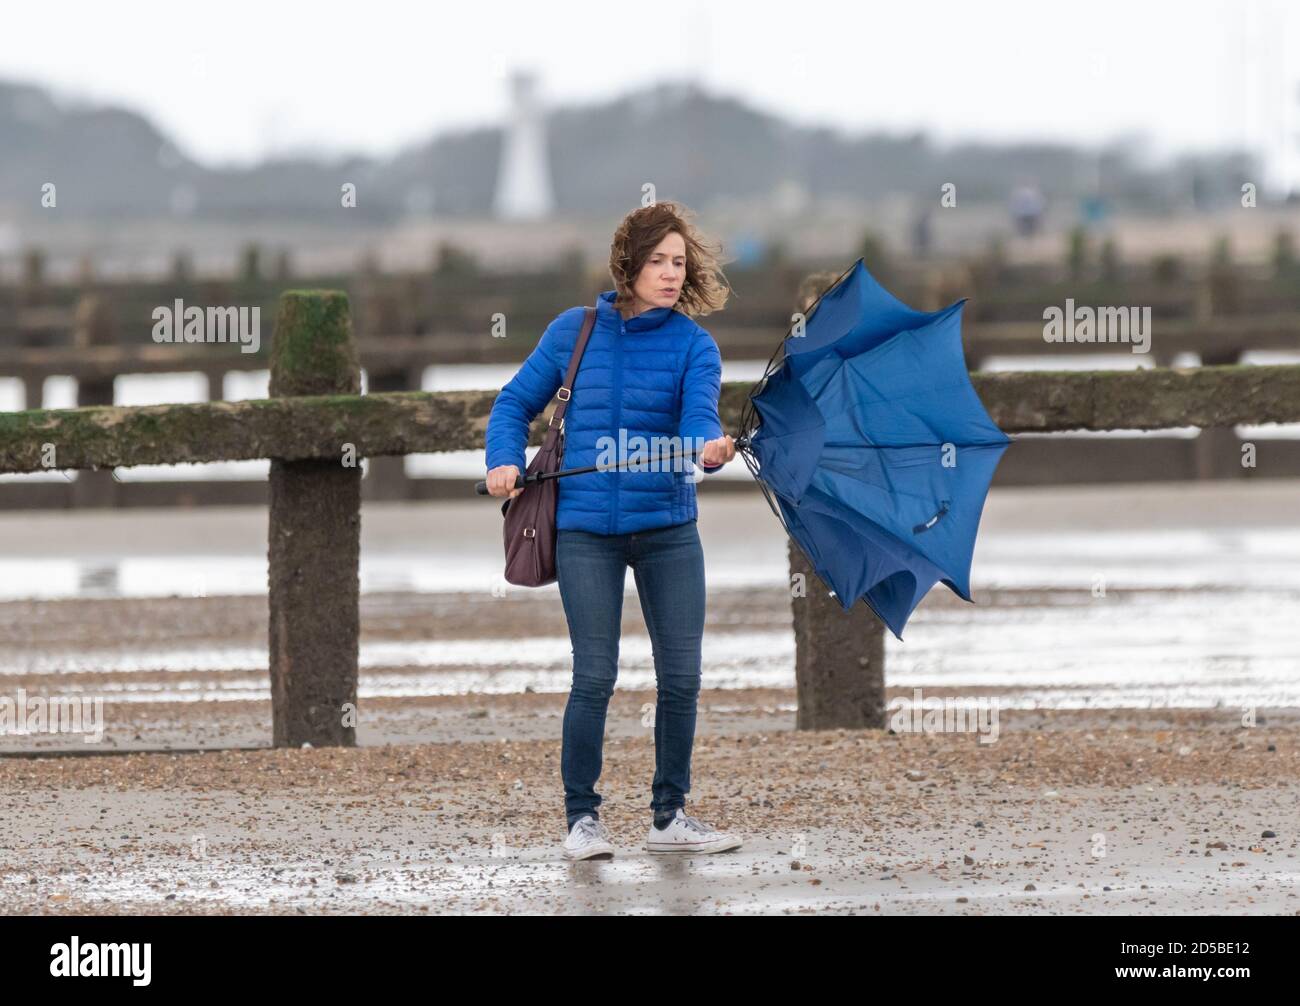 Lady struggling to put up umbrella while walking on a beach in wet and windy weather in the UK. Putting brolly up. Stock Photo